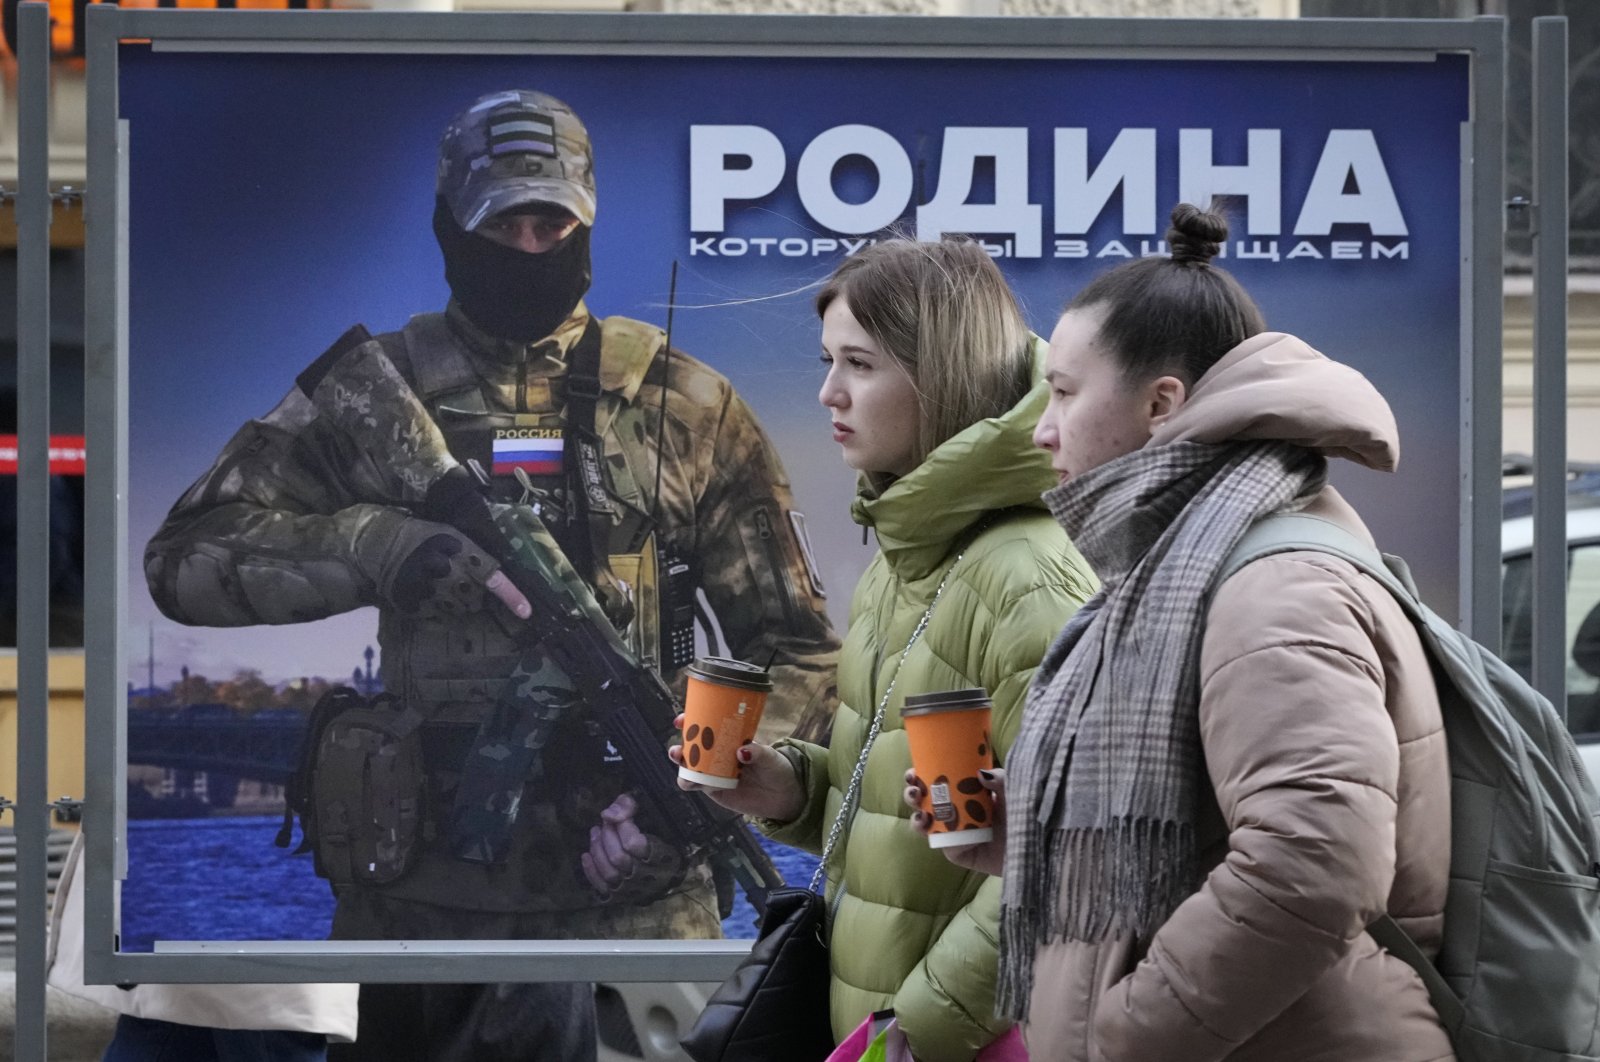 Girls walk past a stand with an image of a Russian serviceman and words &#039;The Motherland we defend&#039; at a street exhibition of military photos in St. Petersburg, Russia, Feb. 9, 2023. (AP Photo)